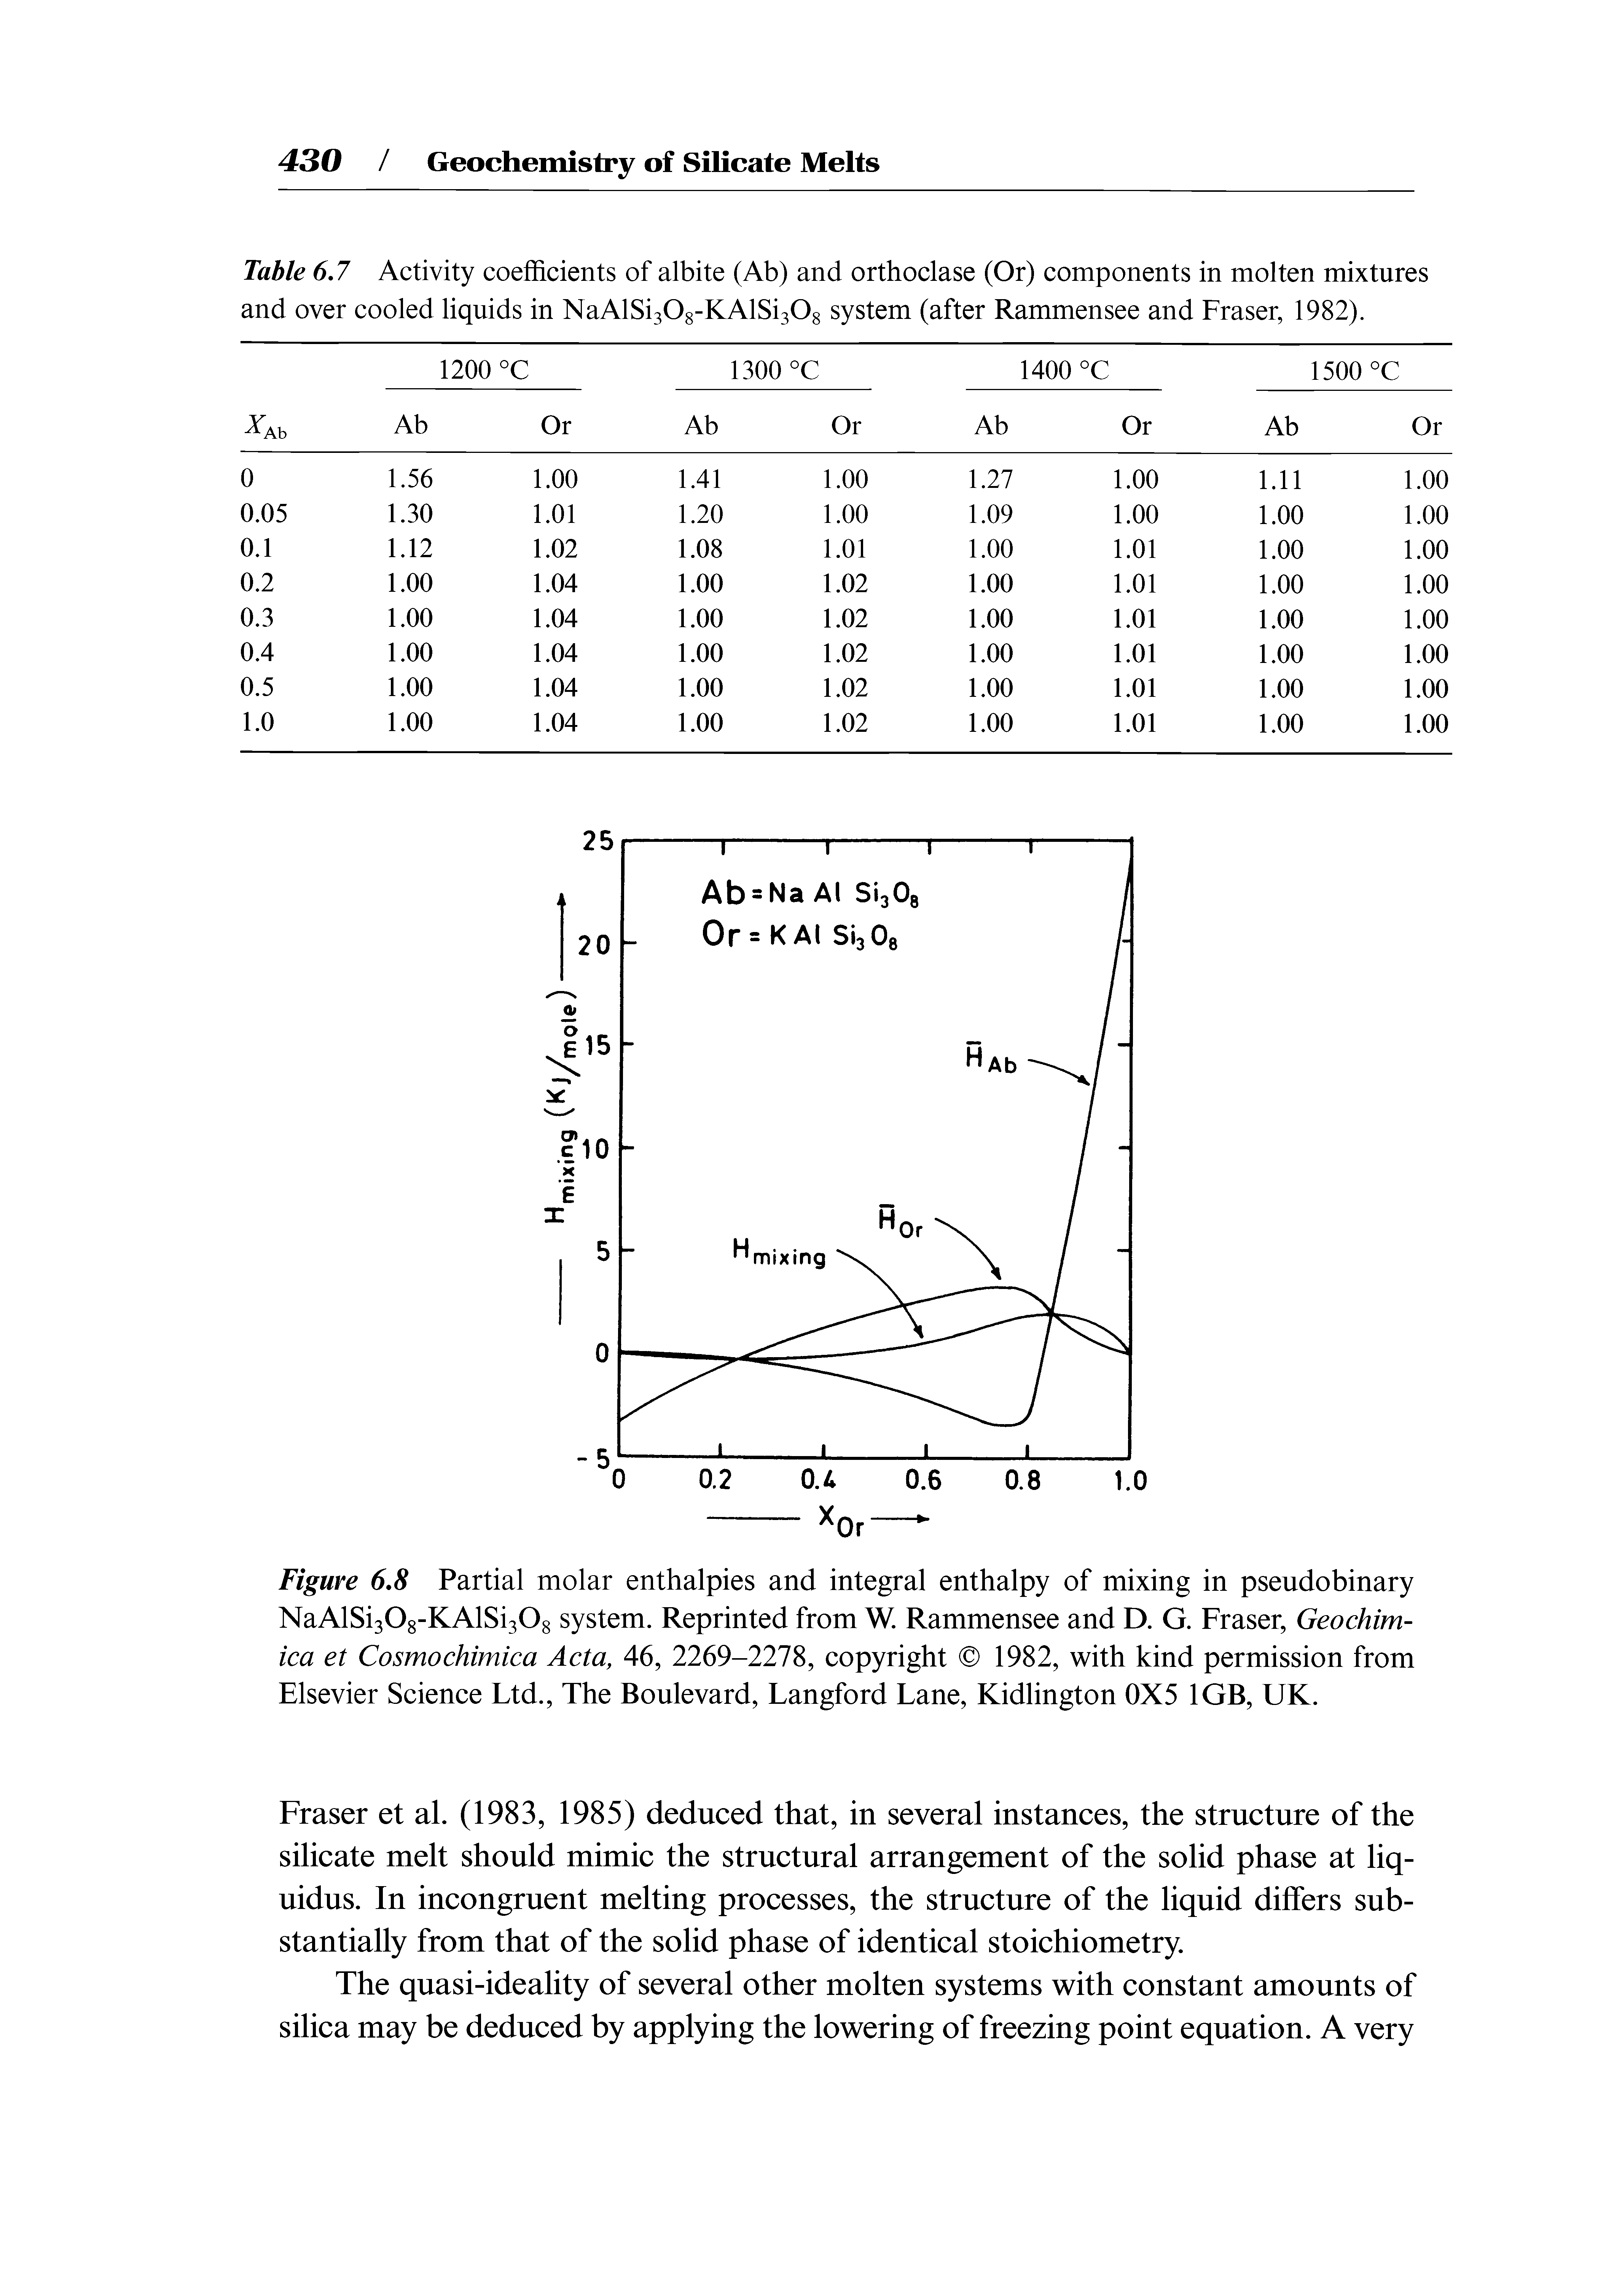 Figure 6.8 Partial molar enthalpies and integral enthalpy of mixing in pseudobinary NaAlSi30g-KAlSi308 system. Reprinted from W. Rammensee and D. G. Fraser, Geochim-ica et Cosmochimica Acta, 46, 2269-2278, copyright 1982, with kind permission from Elsevier Science Ltd., The Boulevard, Langford Lane, Kidlington 0X5 1GB, UK.